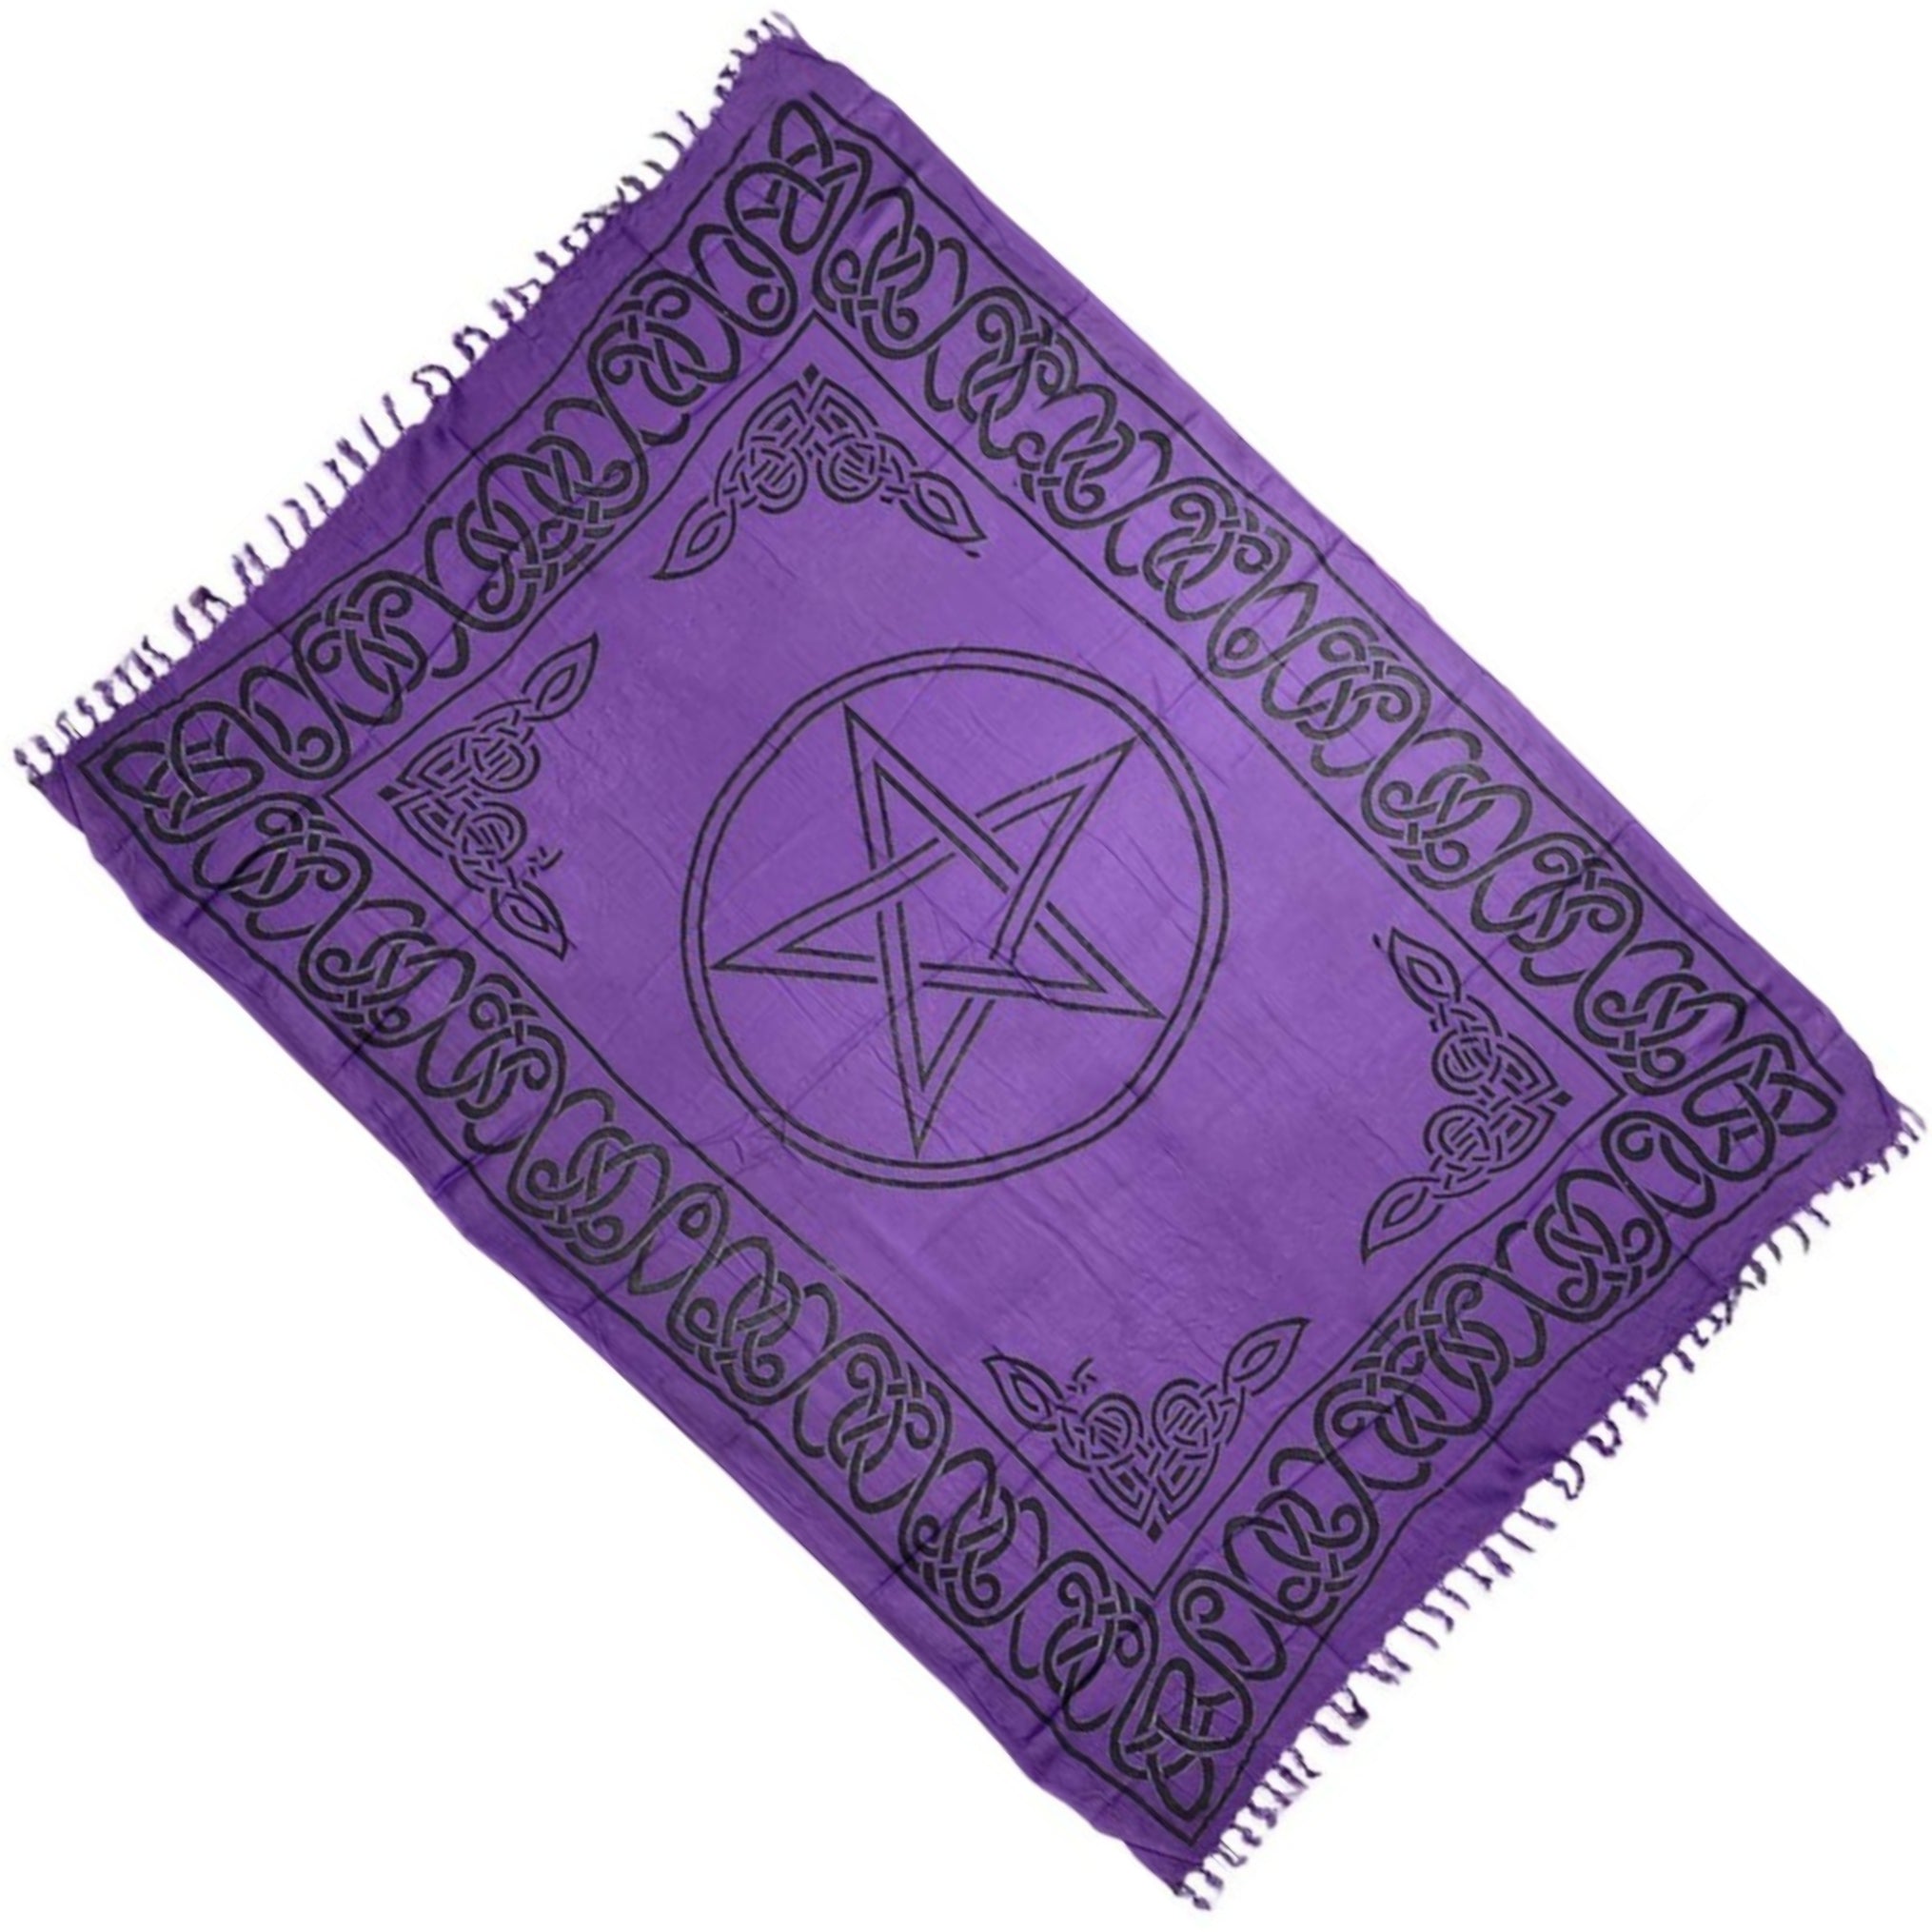 Pentacle Altar Cloth 72 inch - 13 Moons